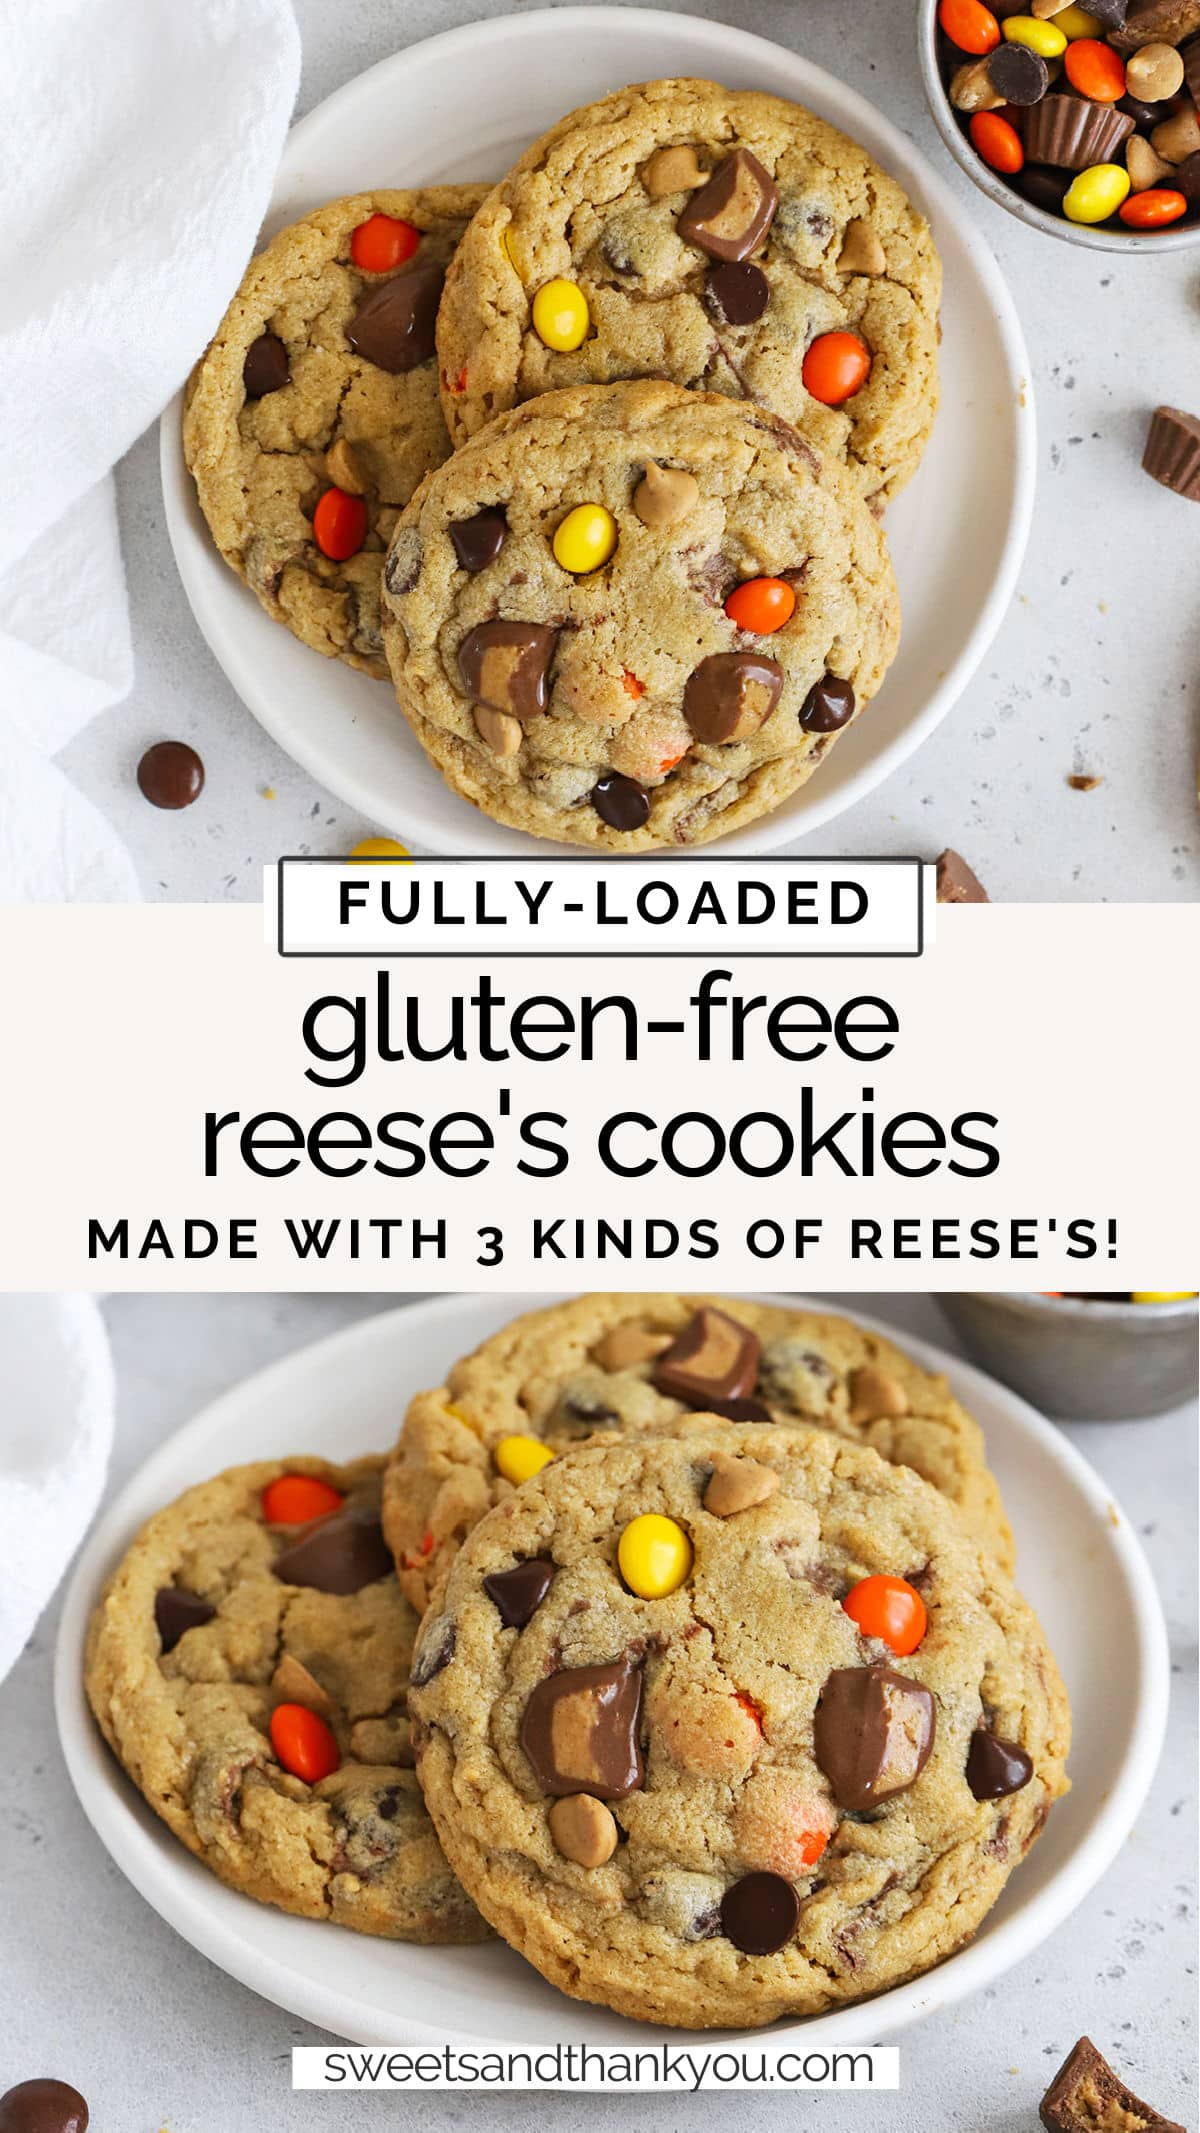 Gluten-Free Reese's Cookies -  These gluten-free peanut butter cookies are fully loaded with Reese's cups, Reese's pieces, peanut butter chips AND chocolate chips! The ultimate cookie for peanut butter lovers! / gluten free Reese's peanut butter cookies / gluten-free Reeses peanut butter chocolate chip cookies // gluten-free chocolate peanut butter cookies // gluten-free Reese's pieces cookies /